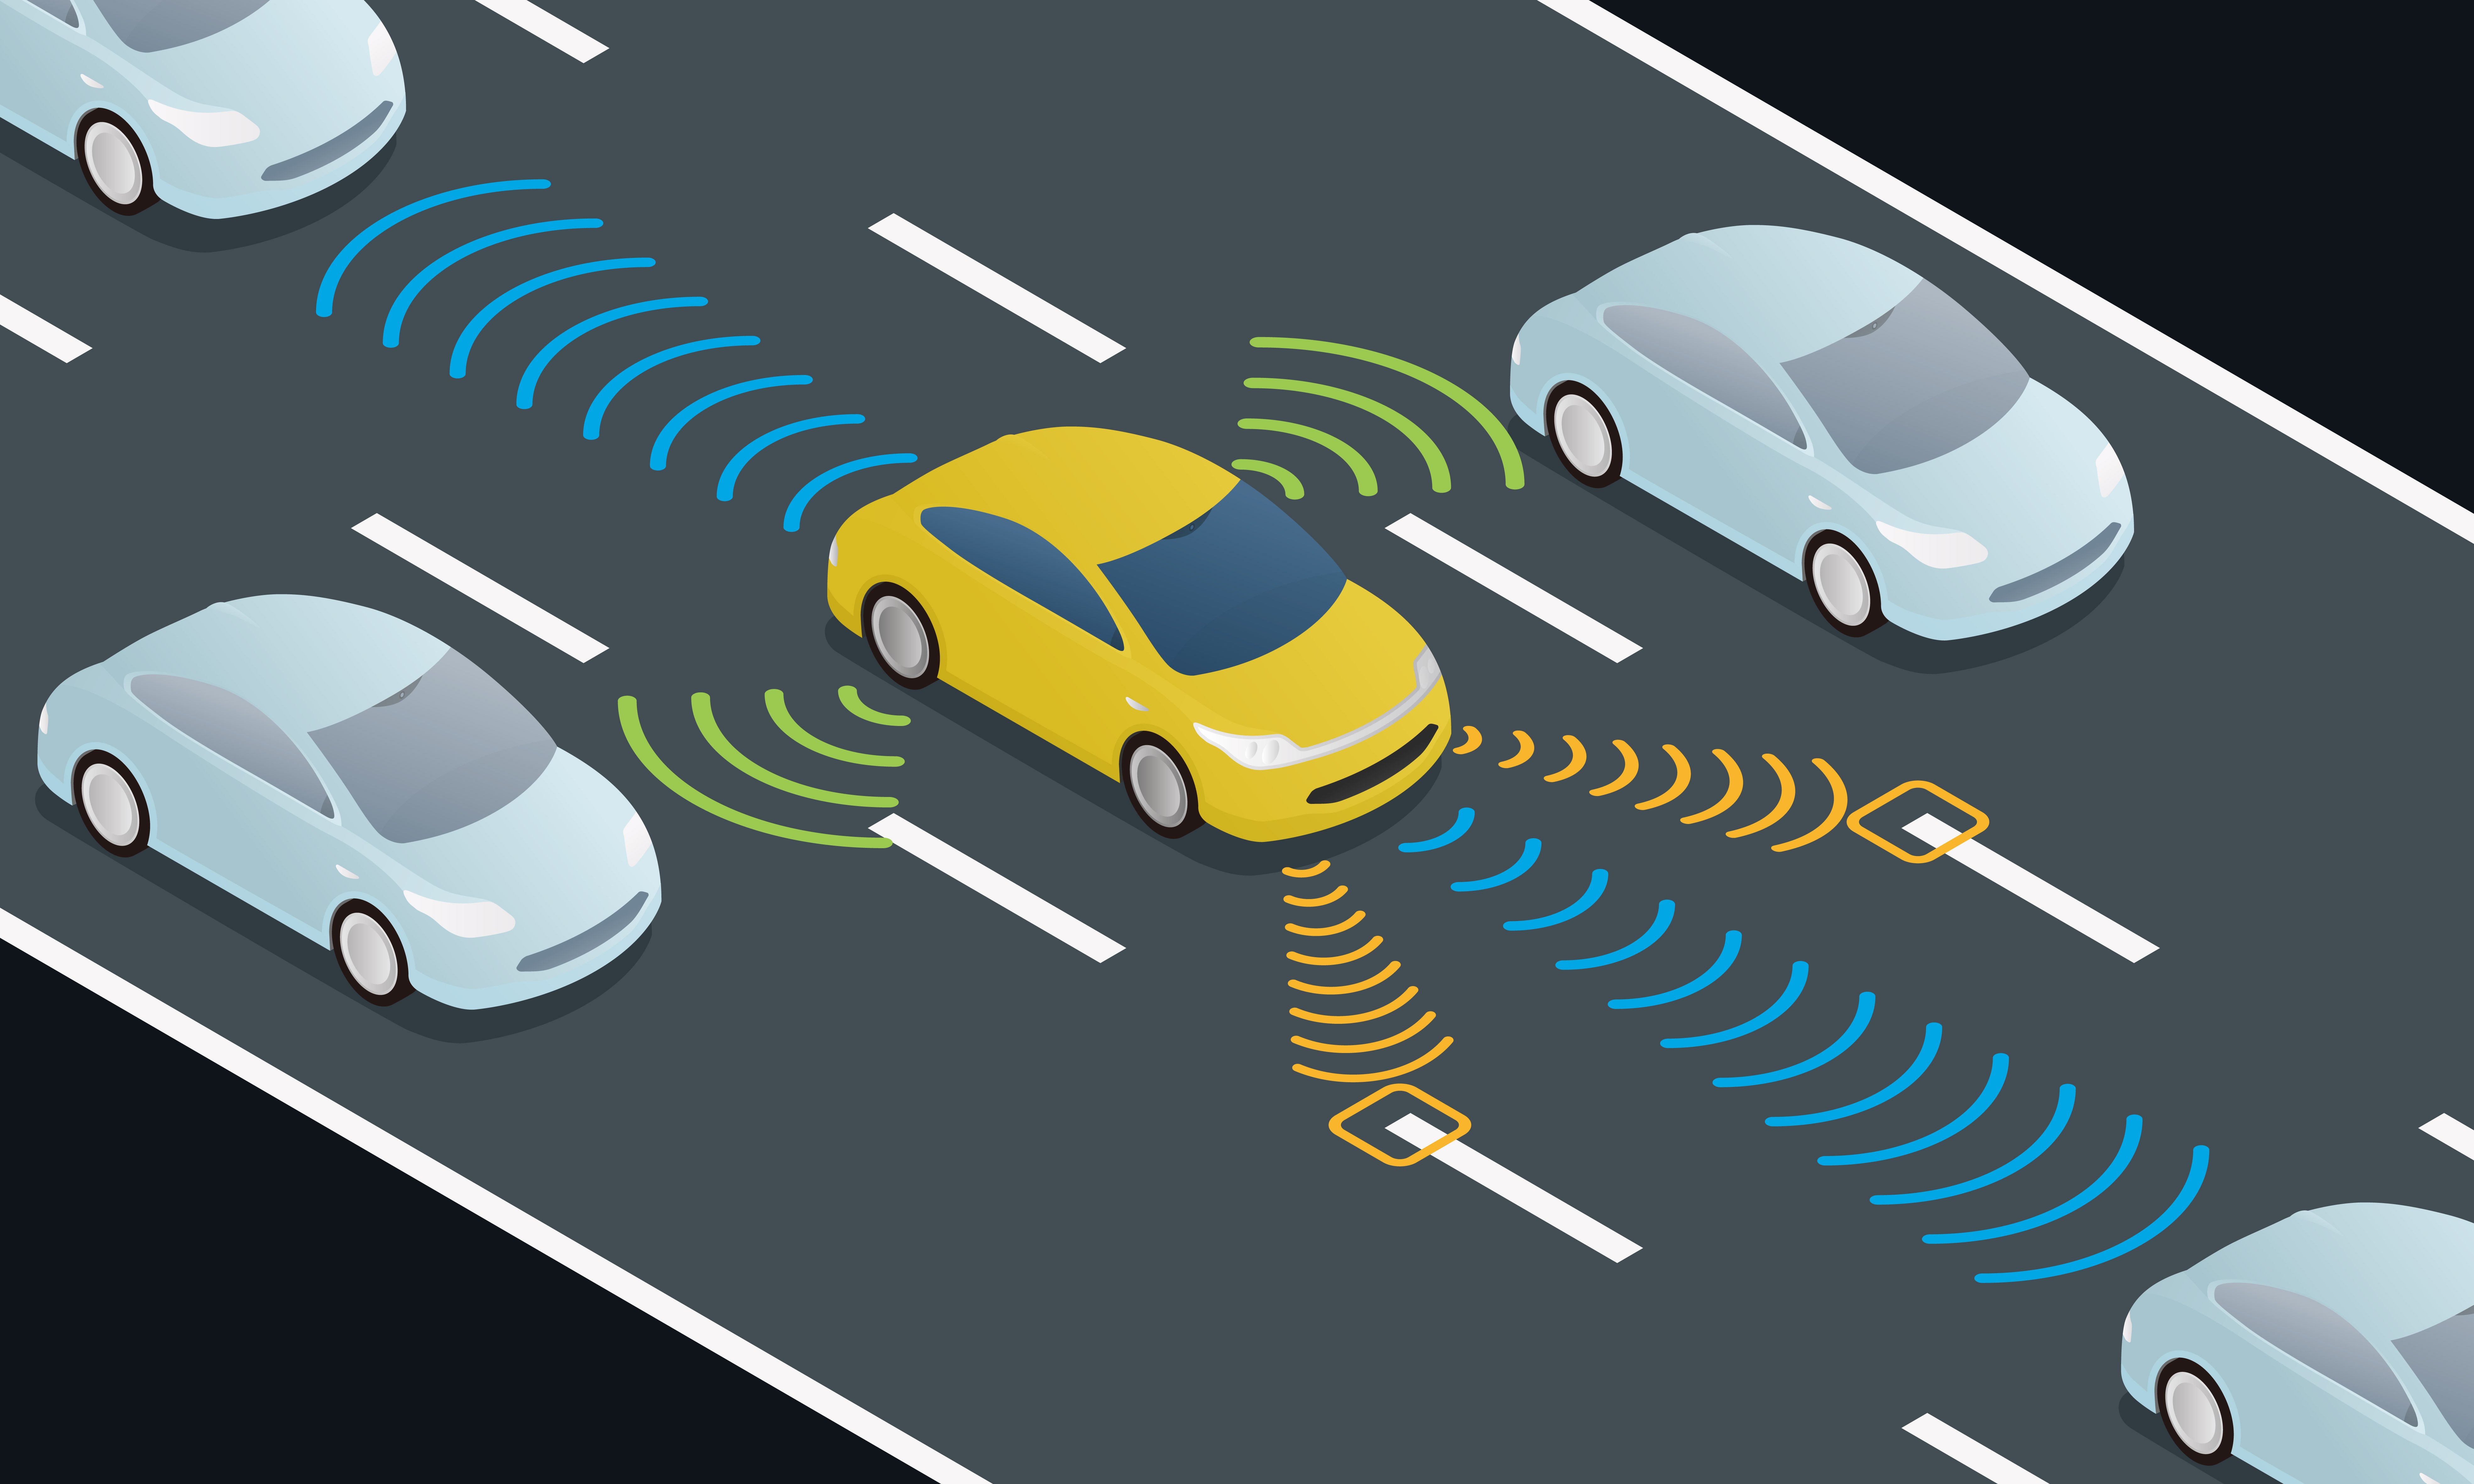 Could Vehicle to Vehicle Communication Prevent Car Crashes?